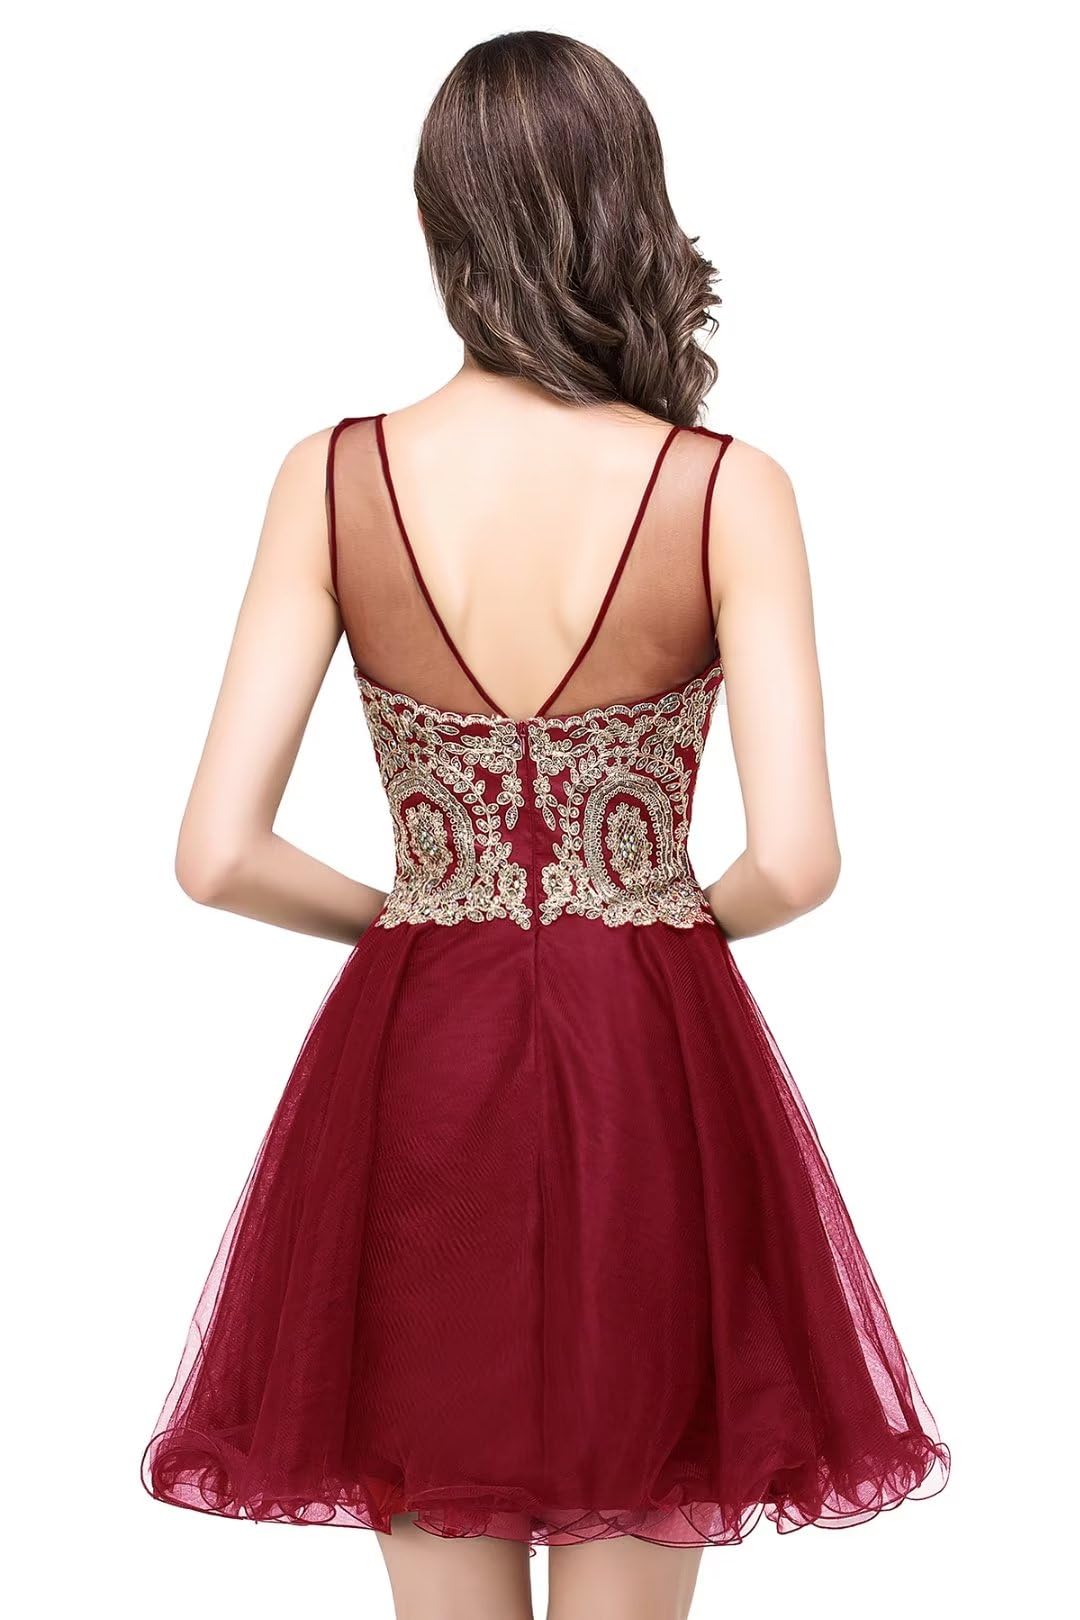 MisShow Womens Short Tulle Crystals Applique Homecoming Dress Short Formal Prom Gown Burgundy XL